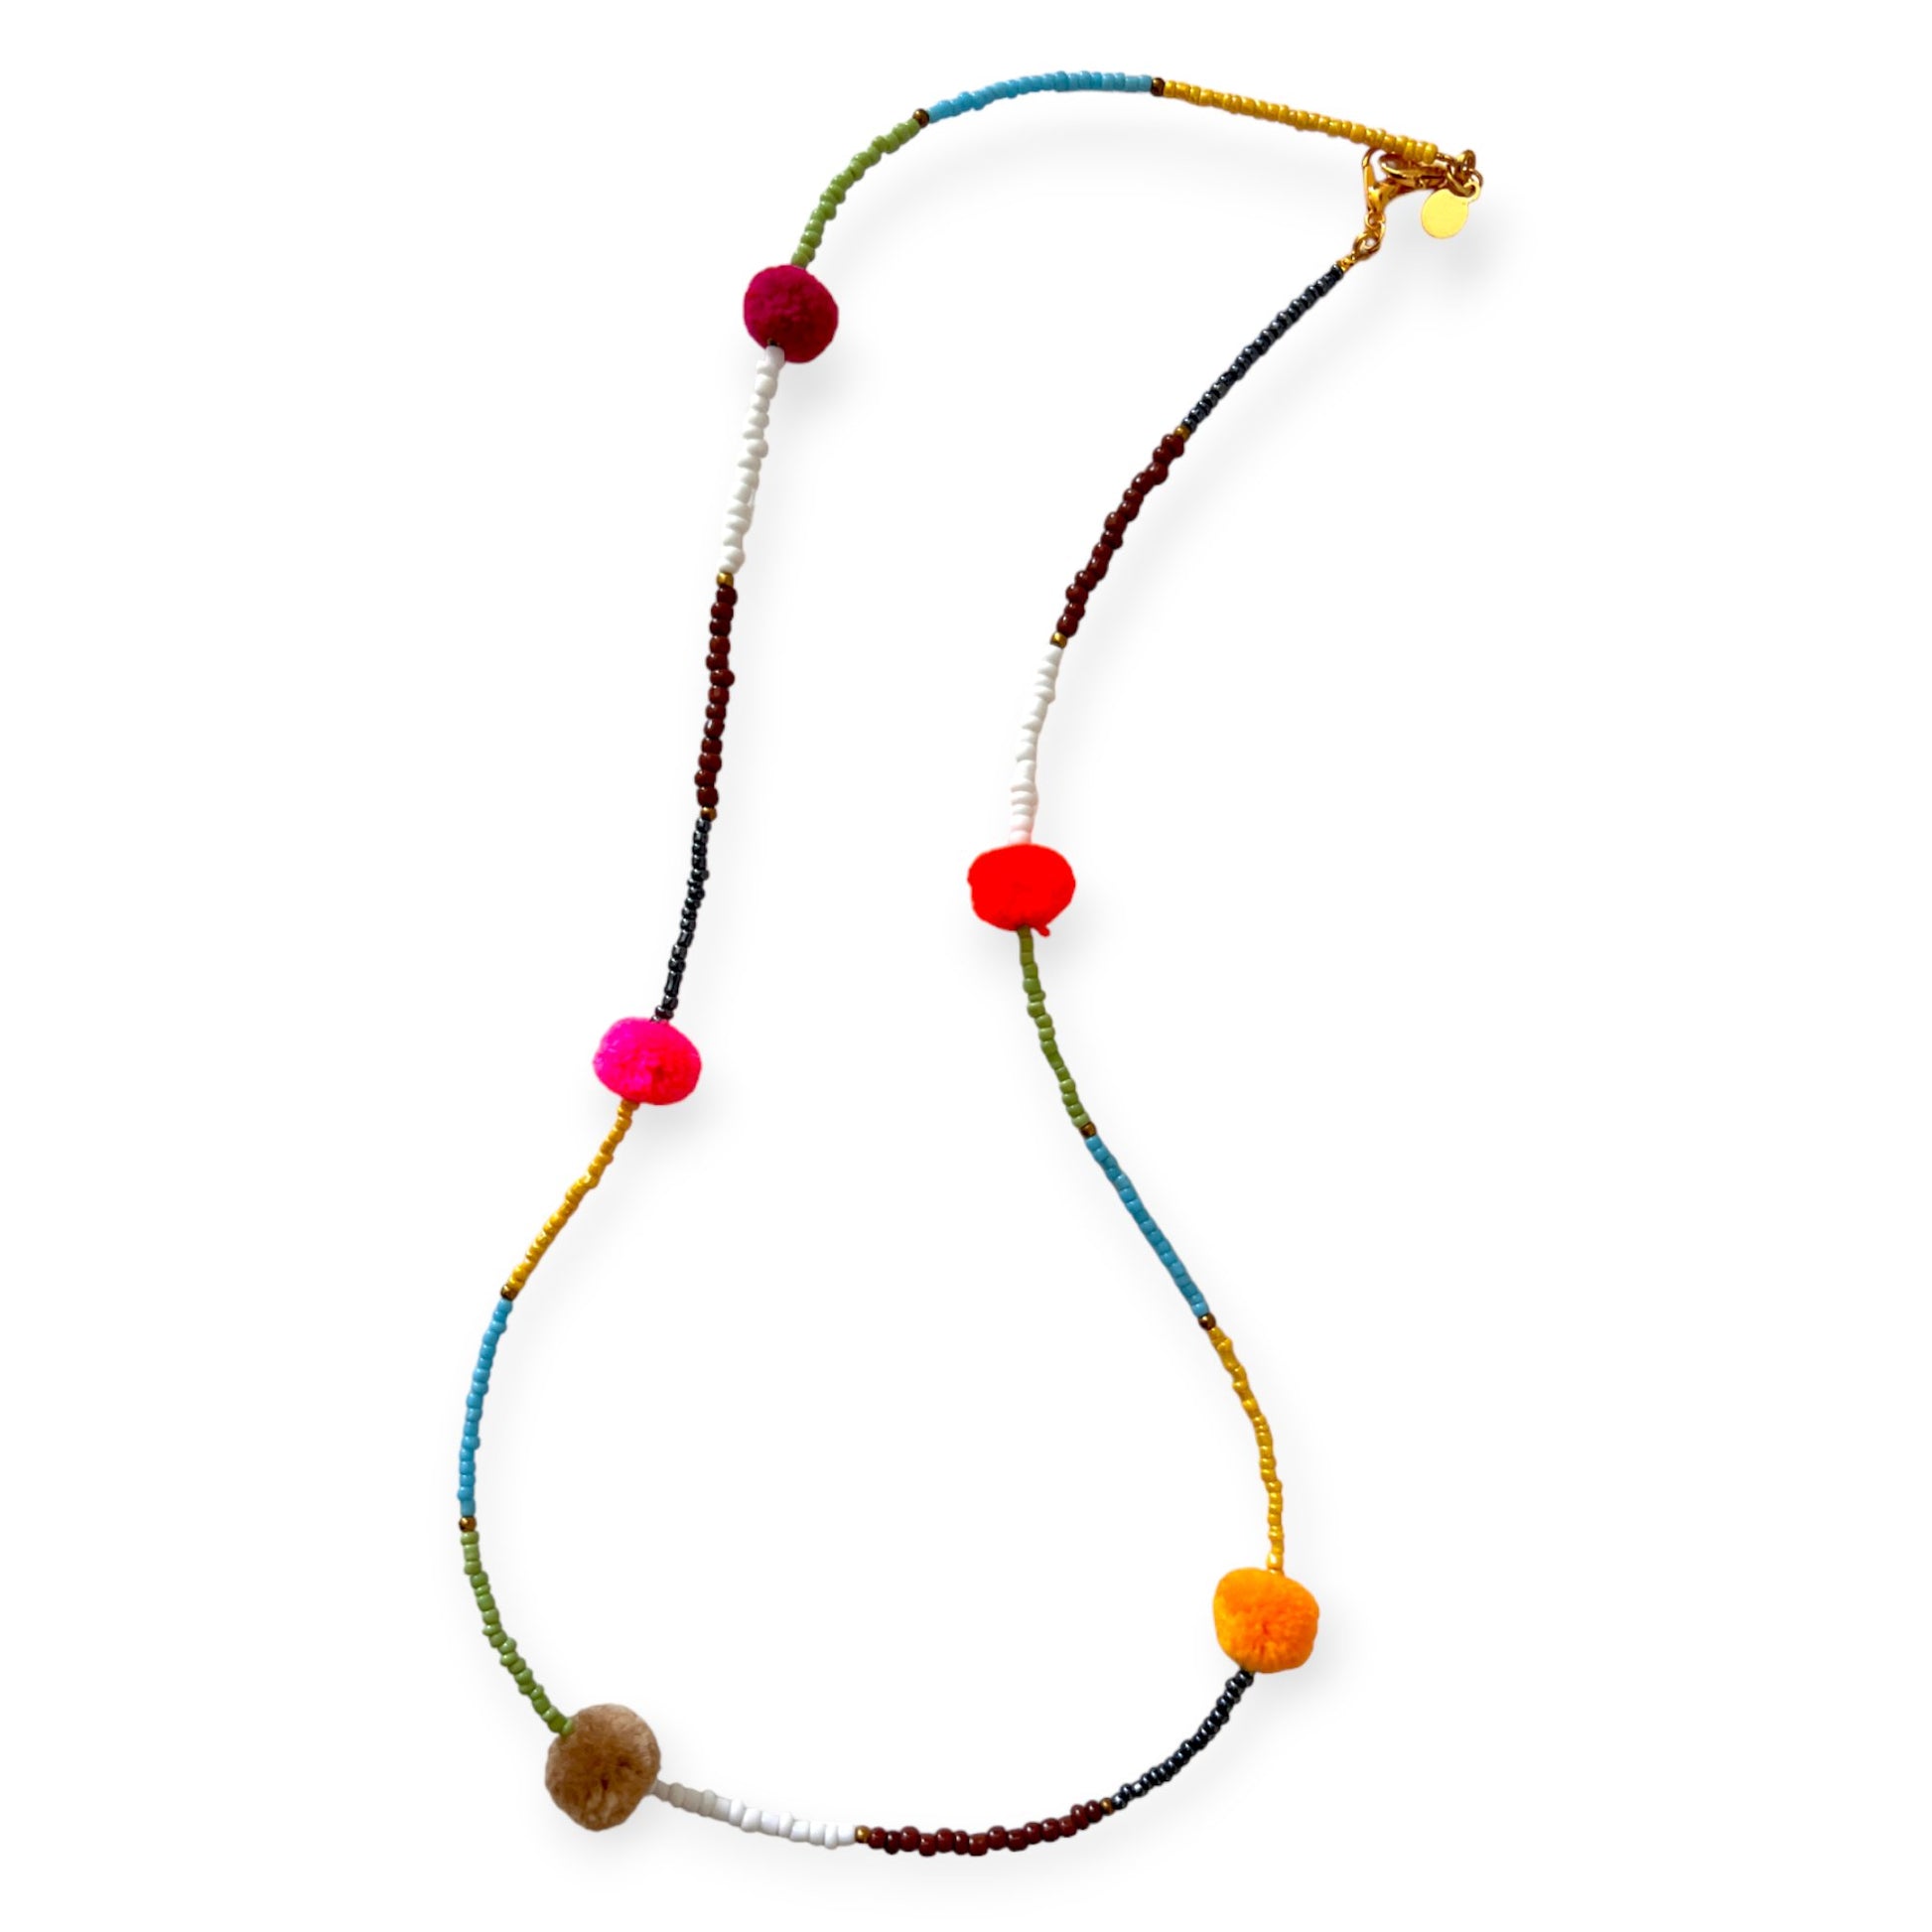 Colorful tribal beaded necklace with brass accents - Sundara Joon